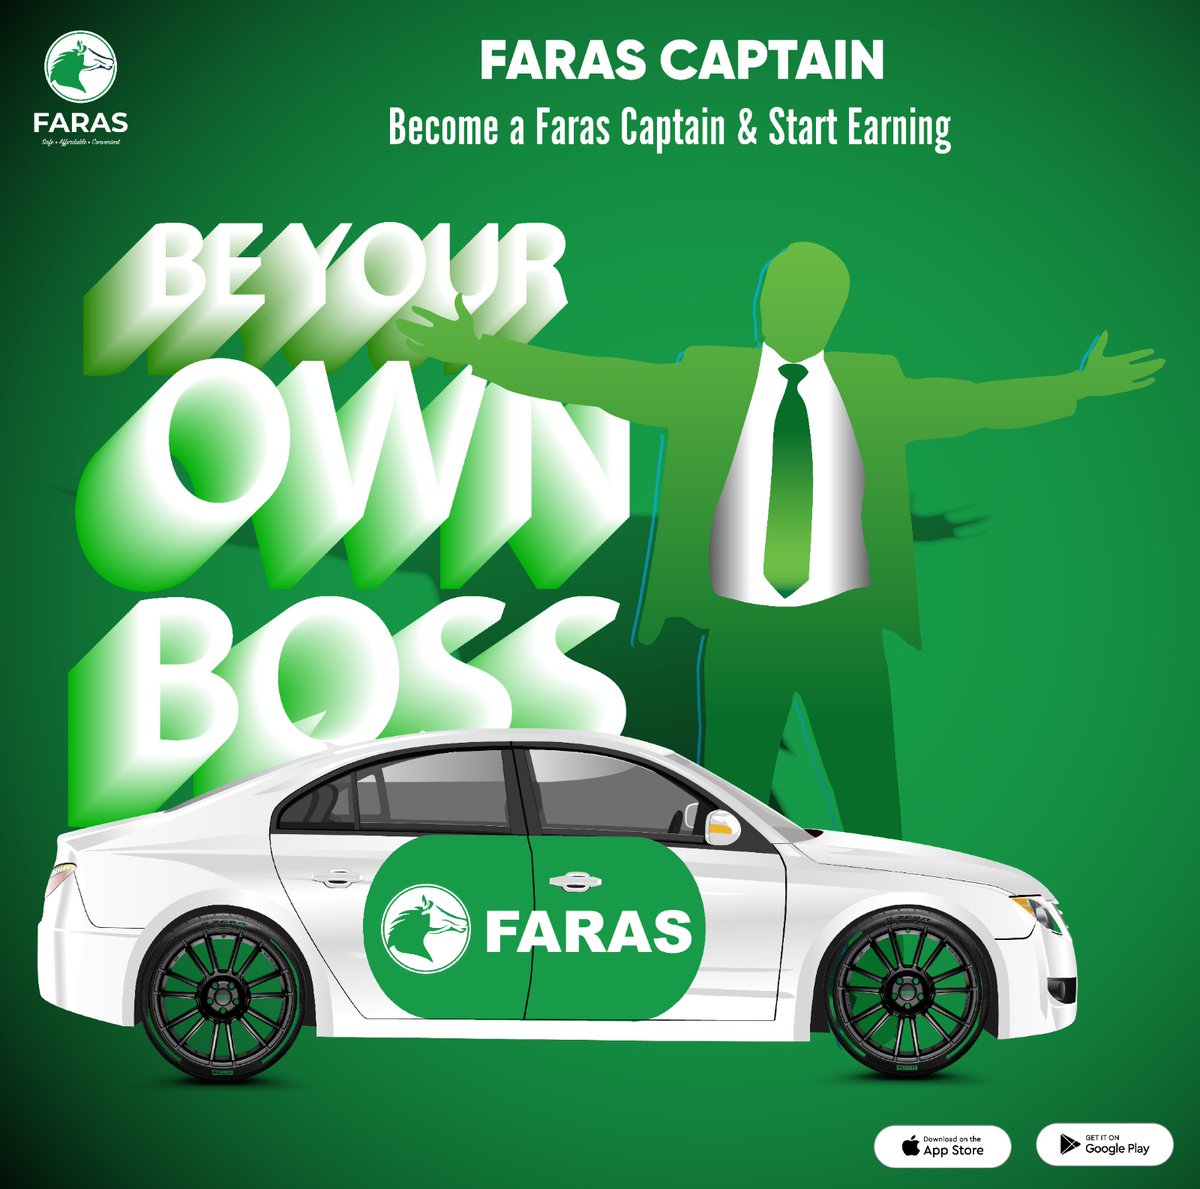 Ready to be a driving force for change this rainy season? #FarasKenyaRewards Join @farasKenya as a captain and become an essential part of Nairobi's transportation infrastructure. With increased demand for rides, your role as a captain is more important than ever in providing